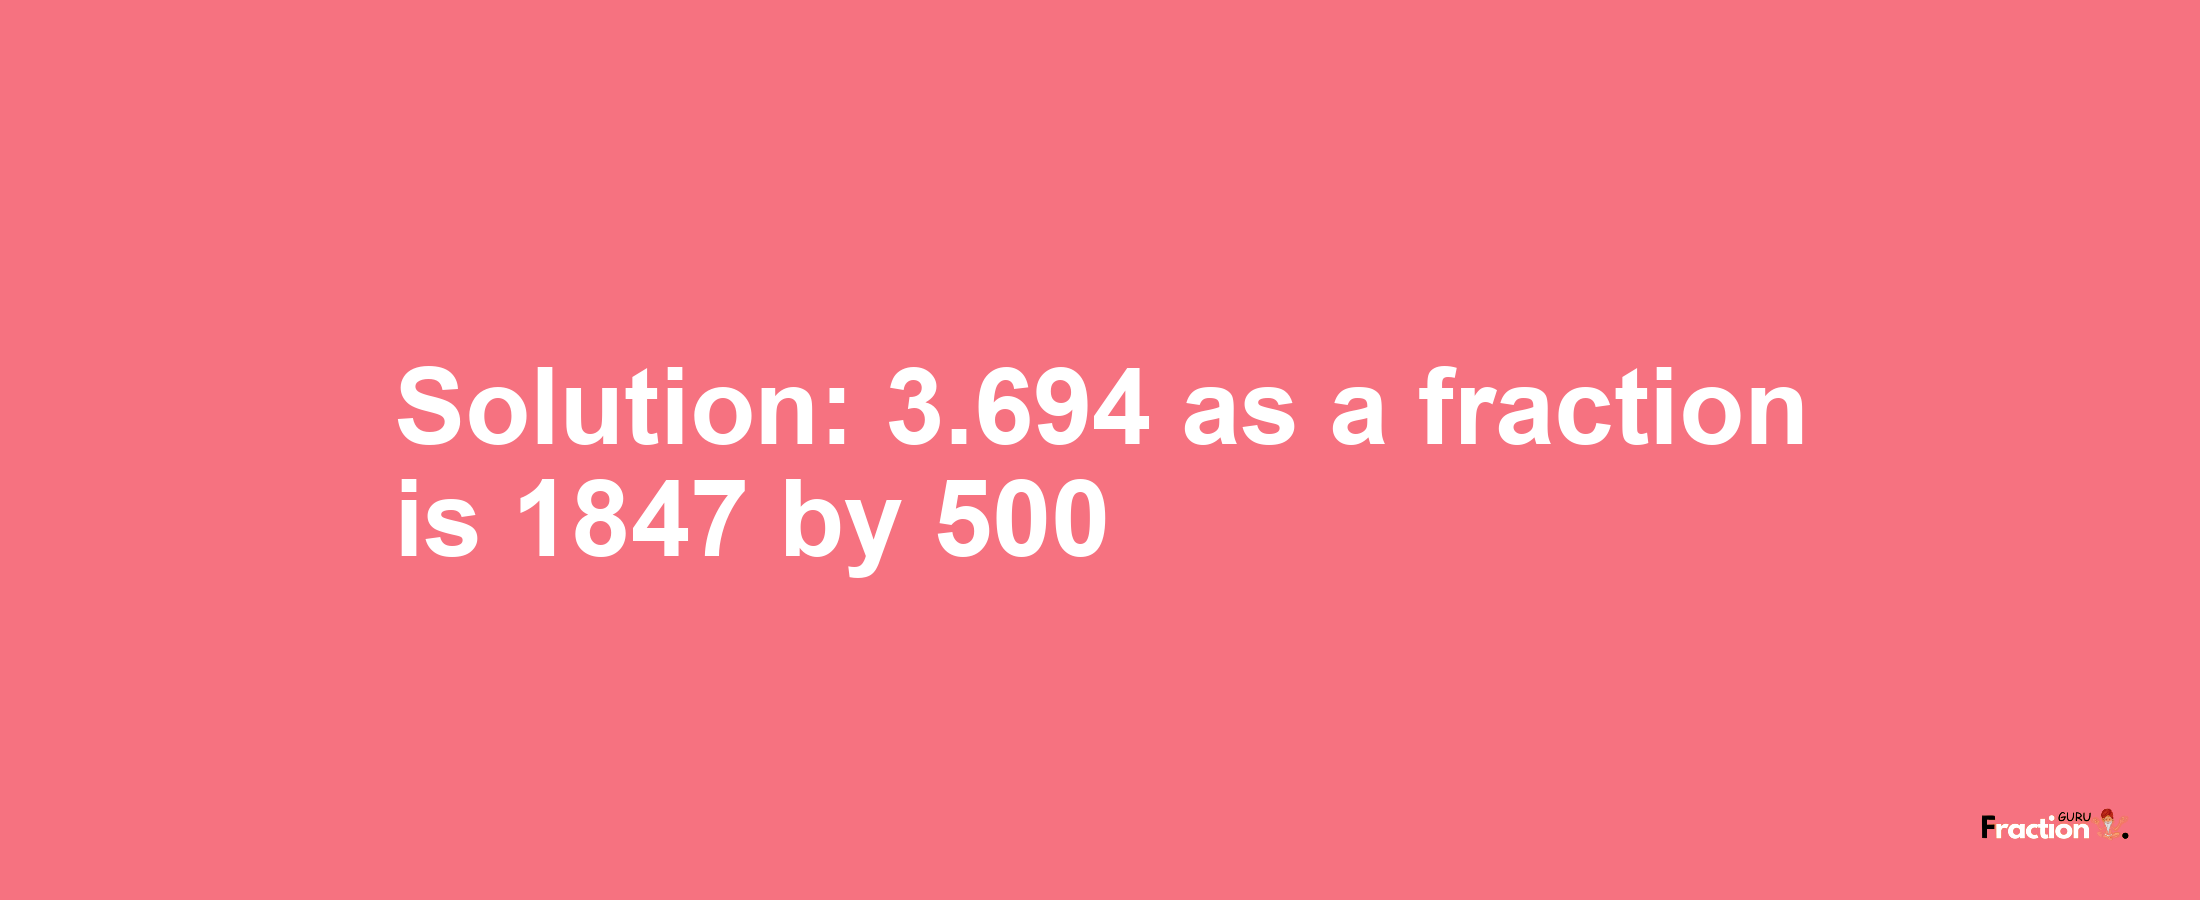 Solution:3.694 as a fraction is 1847/500